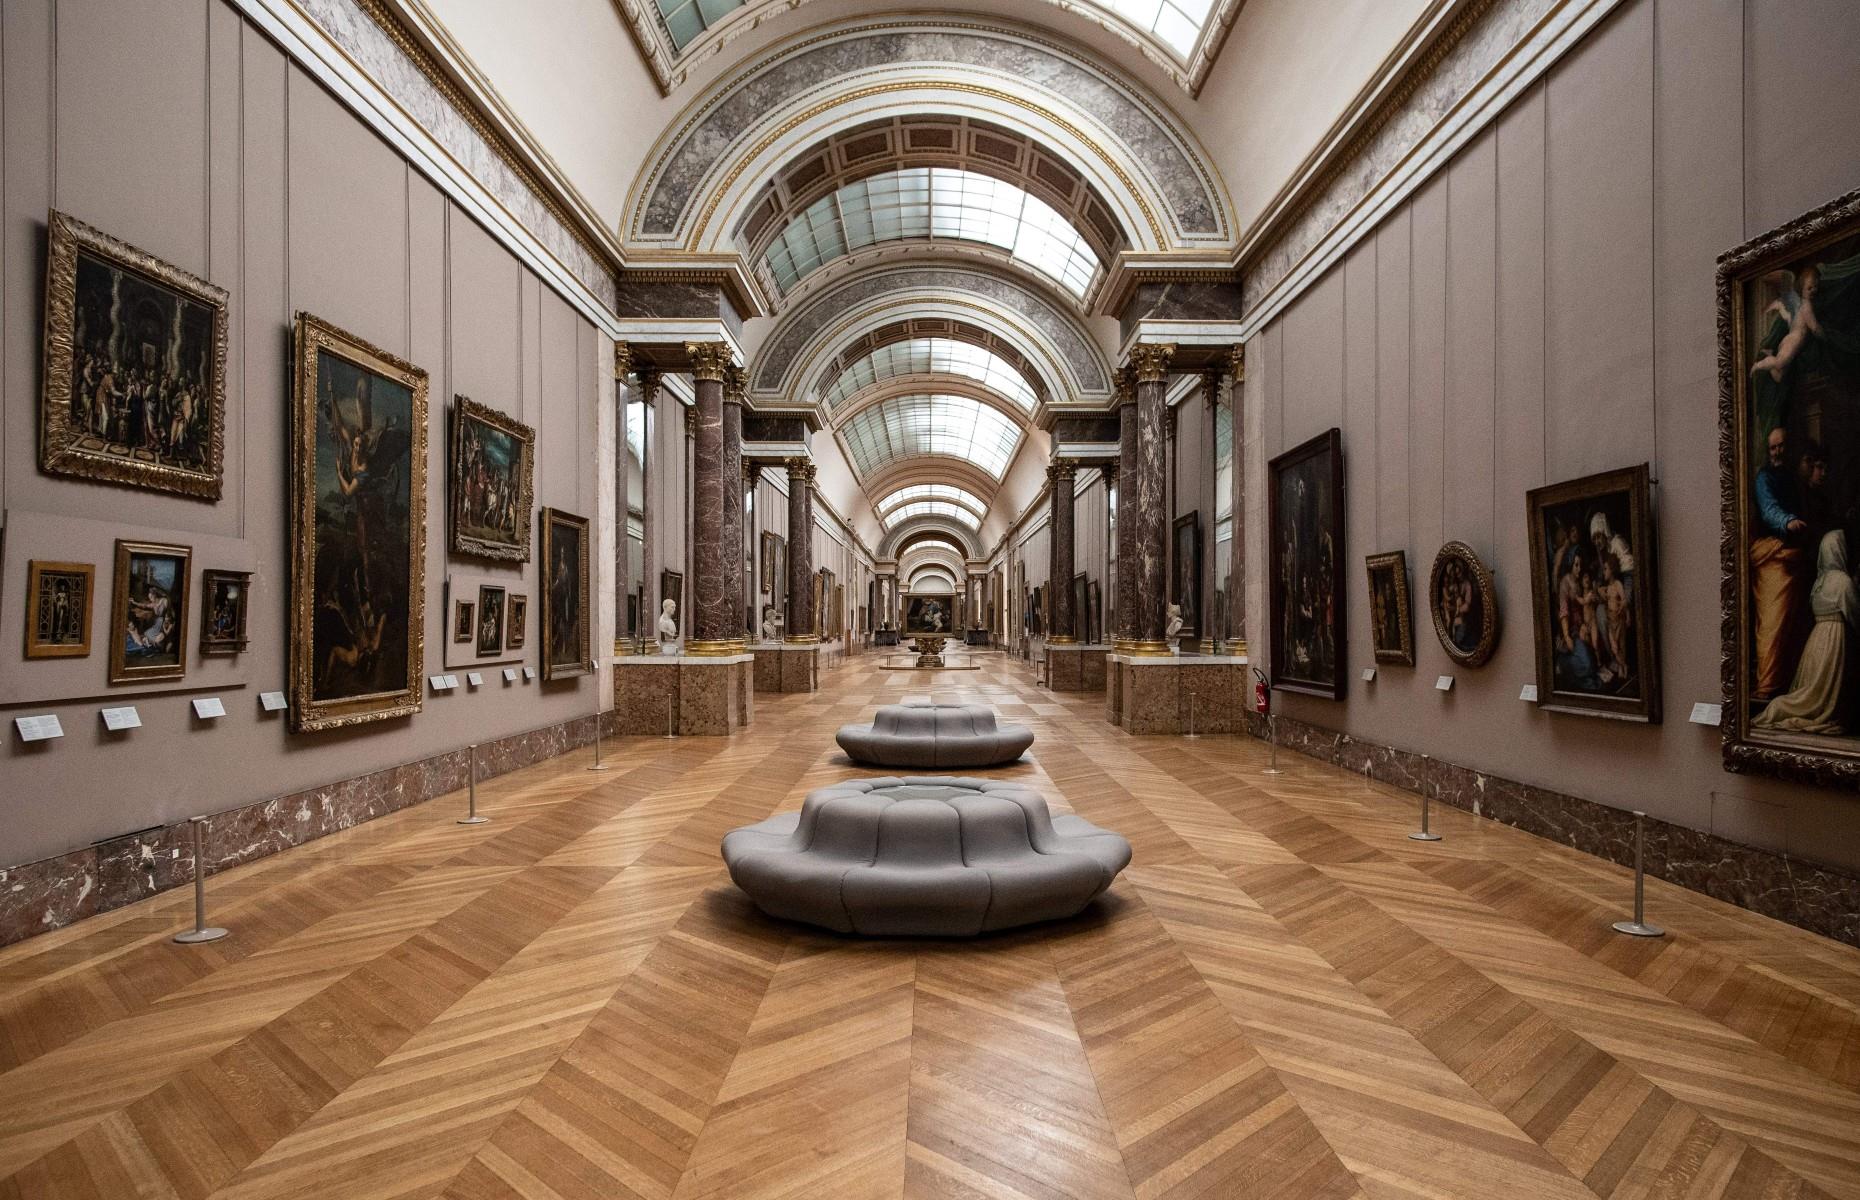 <p>On 21 August 1911, painter Louis Beroud came to the Louvre (pictured) intending to draw a sketch of the Mona Lisa. He was surprised to discover the painting was missing. After confusion as to whether the work may have been getting photographed elsewhere, it was determined it had been stolen. The Louvre closed its doors pending an investigation.</p>